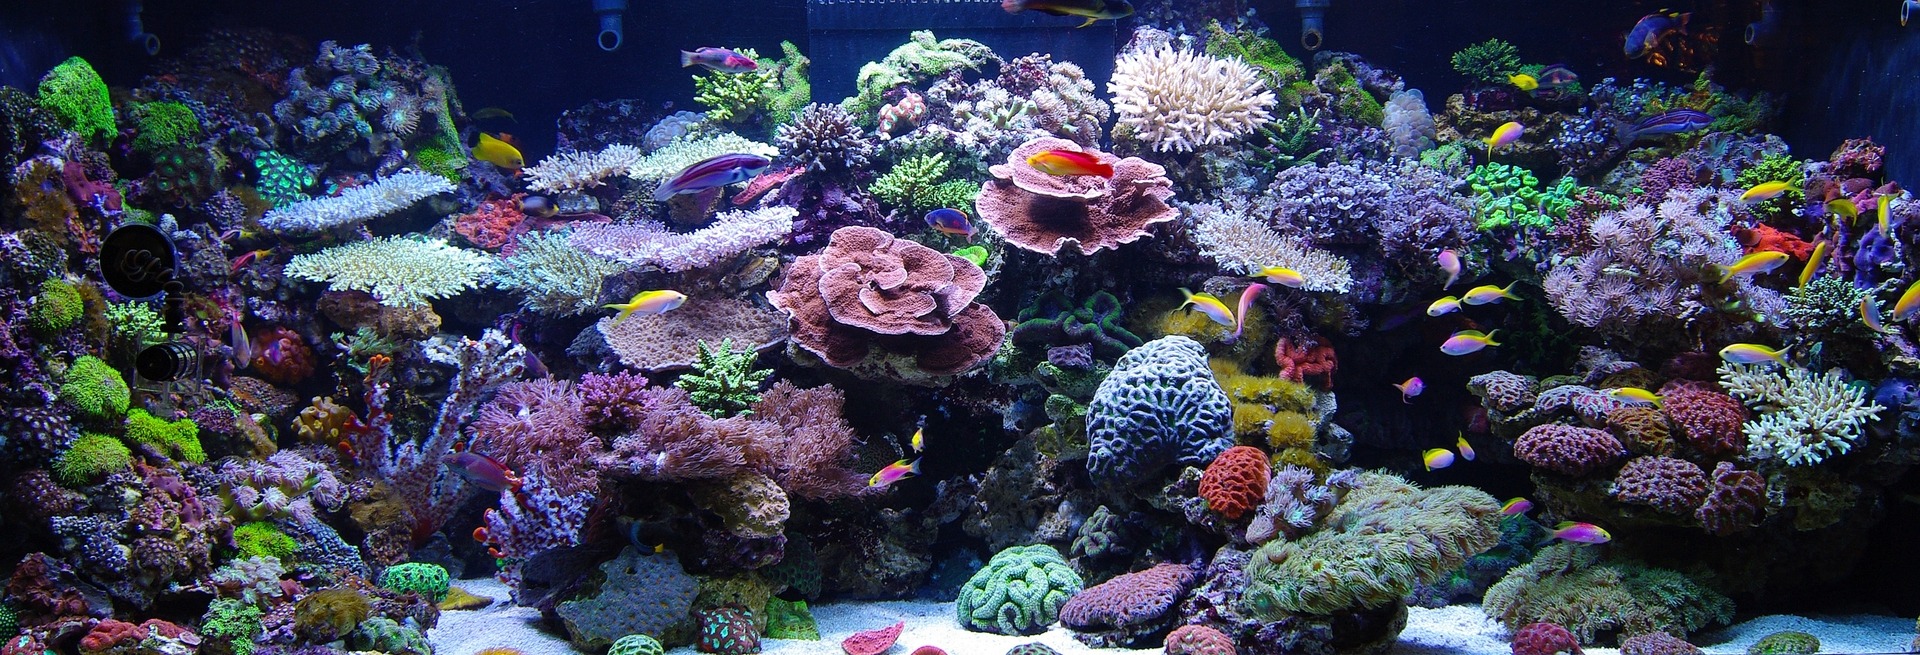 Resonon Hyperspectral Imaging Systems have been used to scan aquariums.